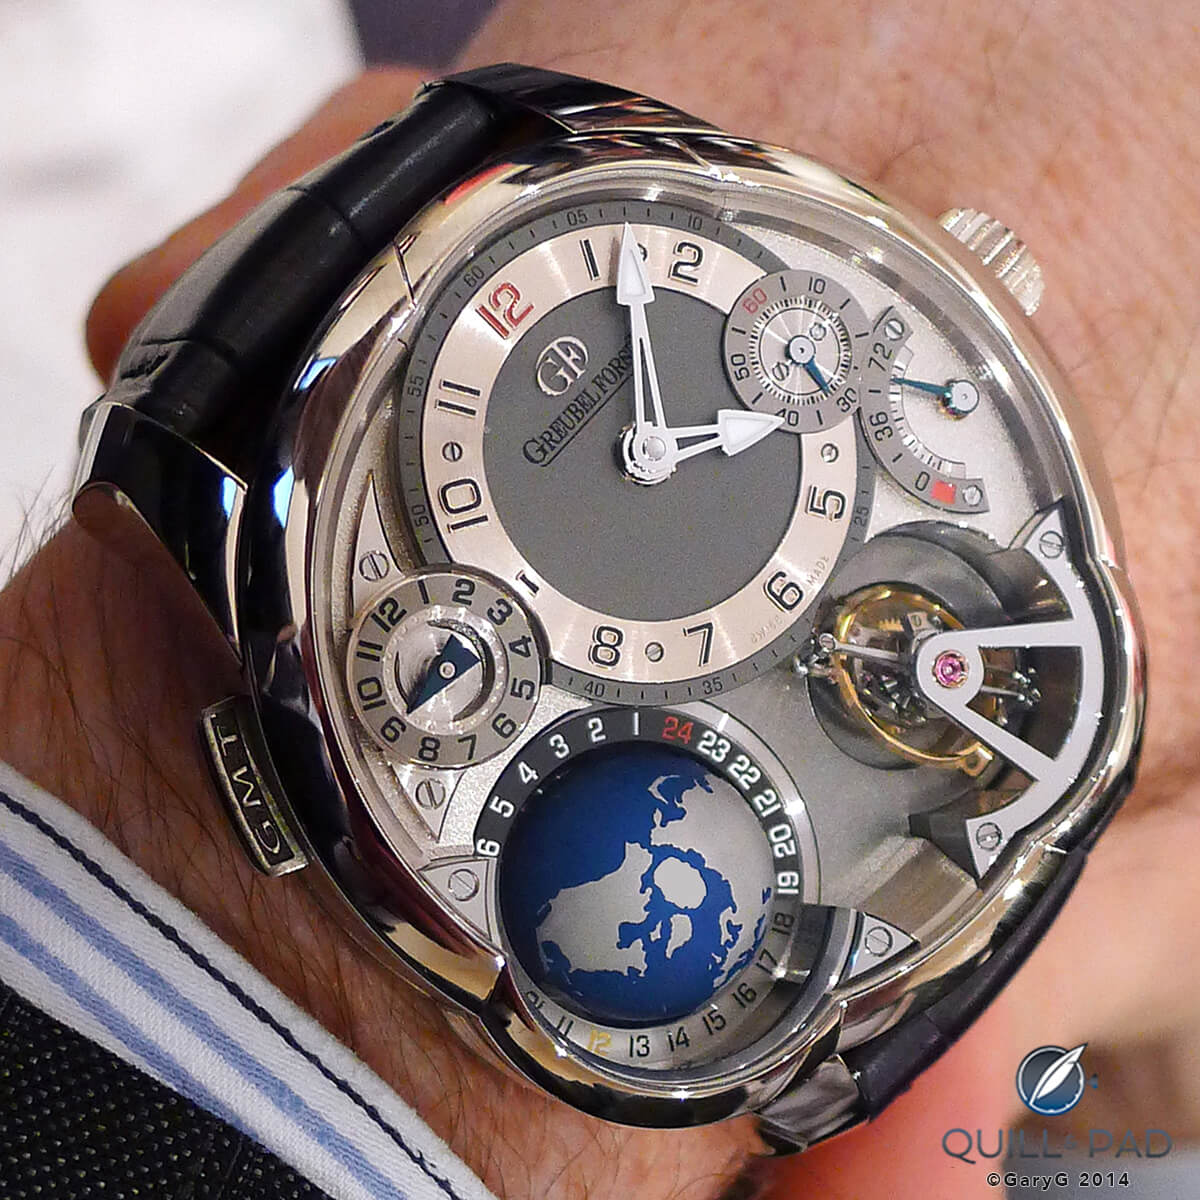 Greubel Forsey GMT on the wrist